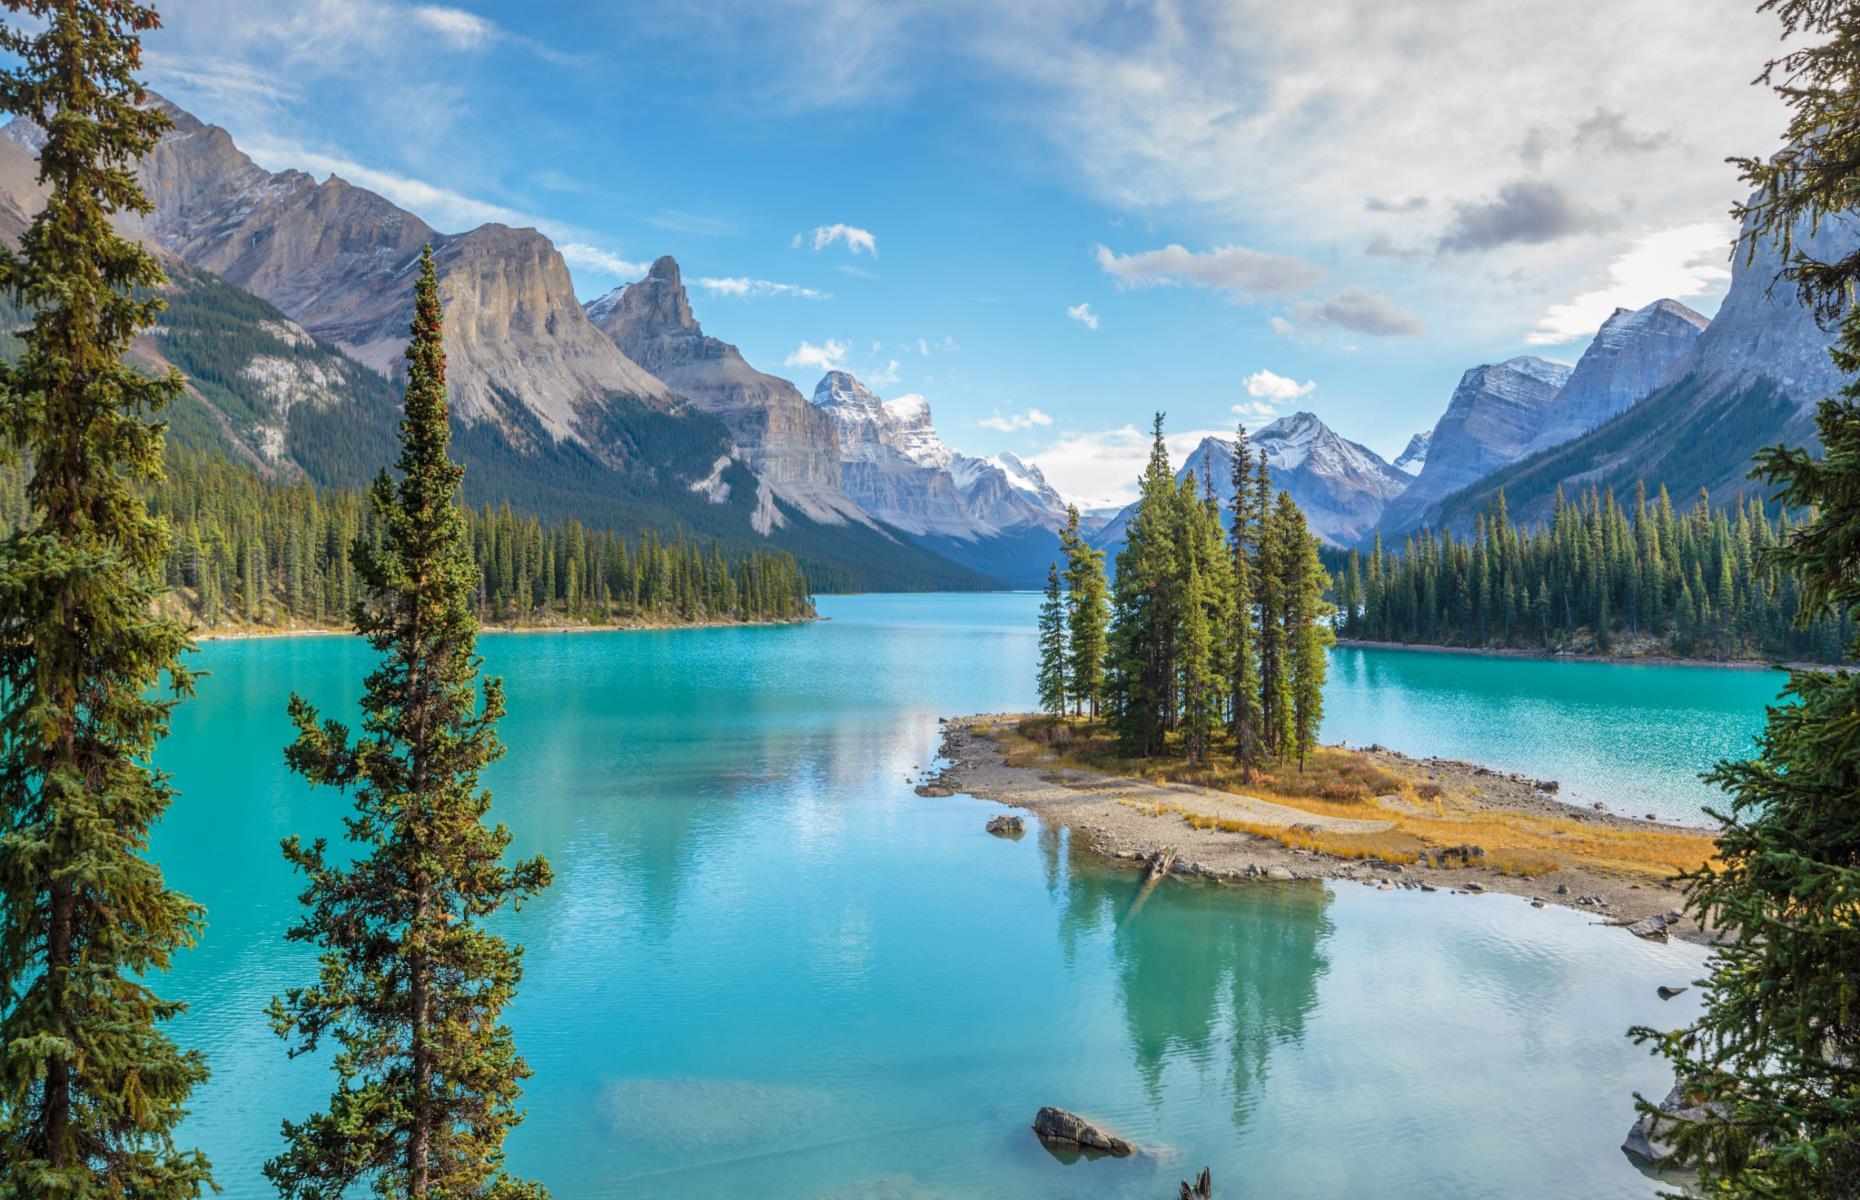 Canada's staggering wilderness shows its true natural beauty